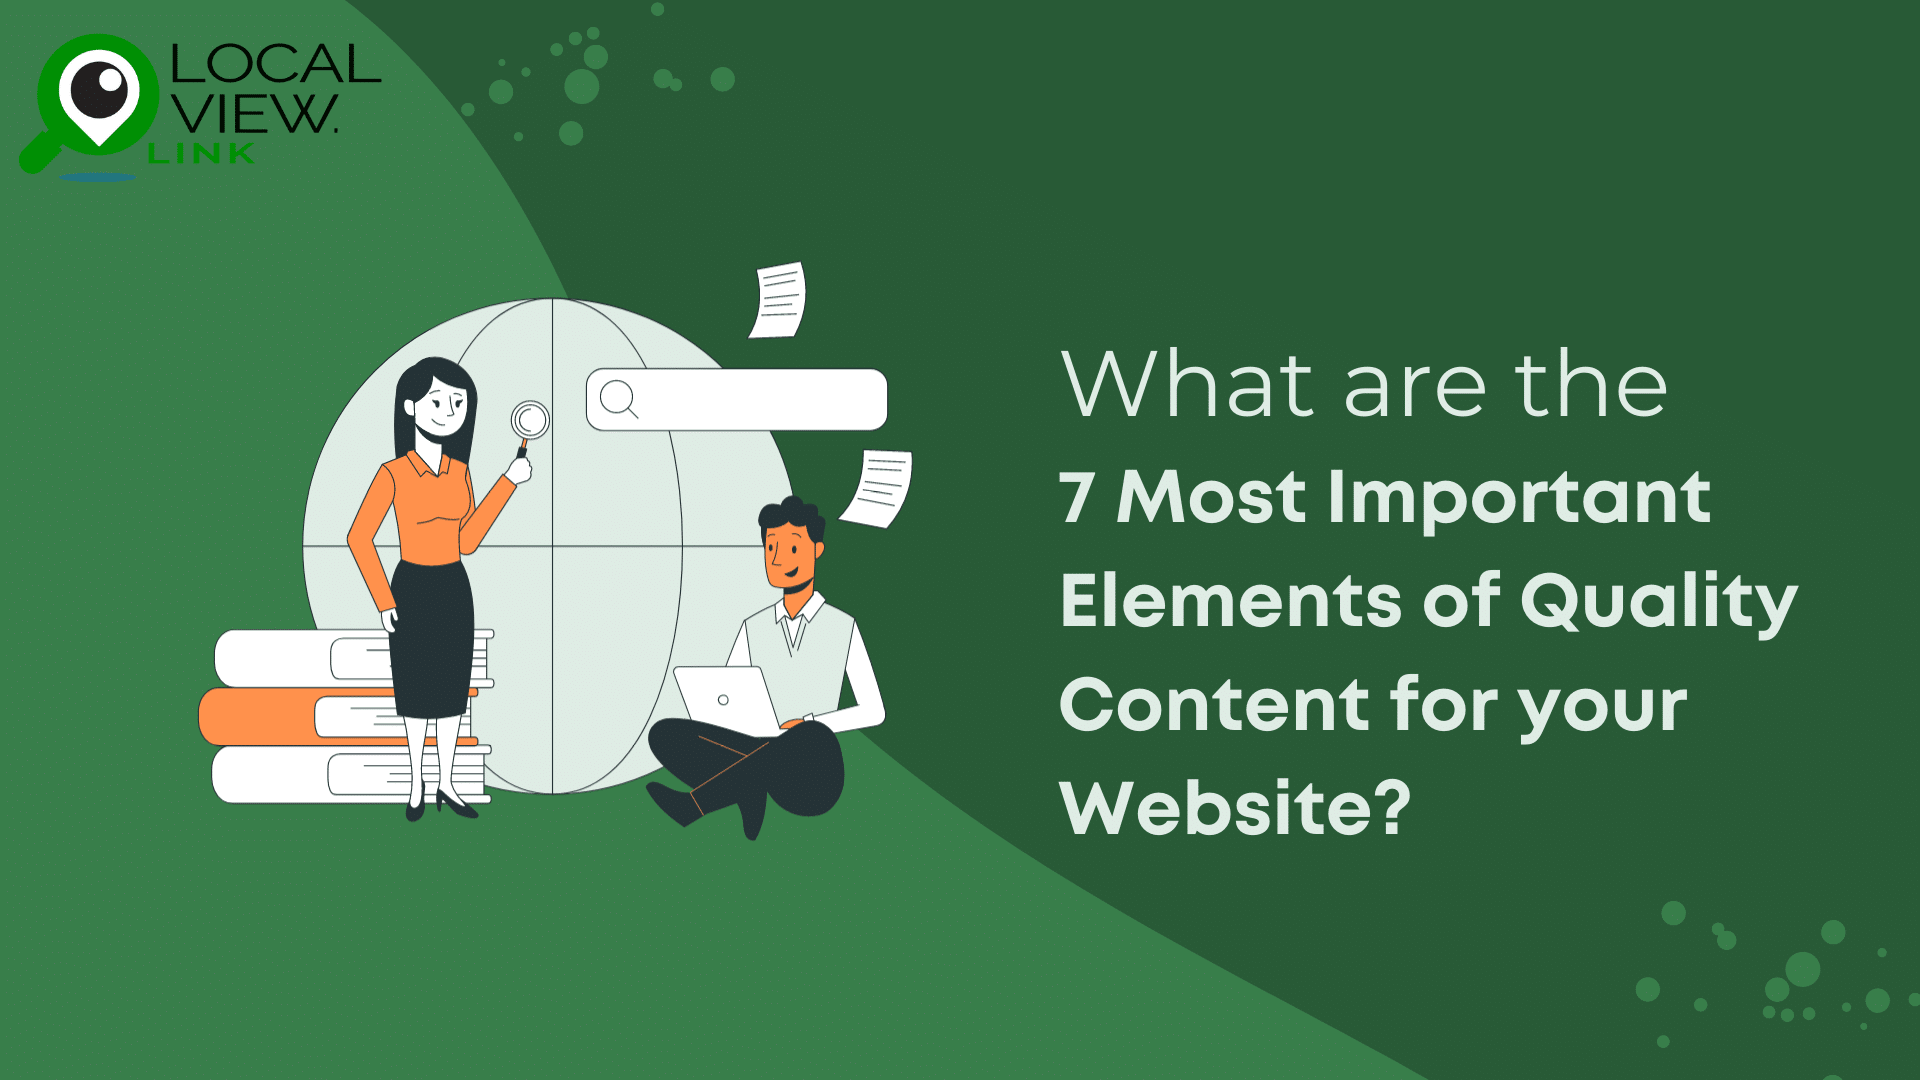 7-Most-Important-Elements-of-Quality-Content-for-your-Website-local-view-digital-marketing